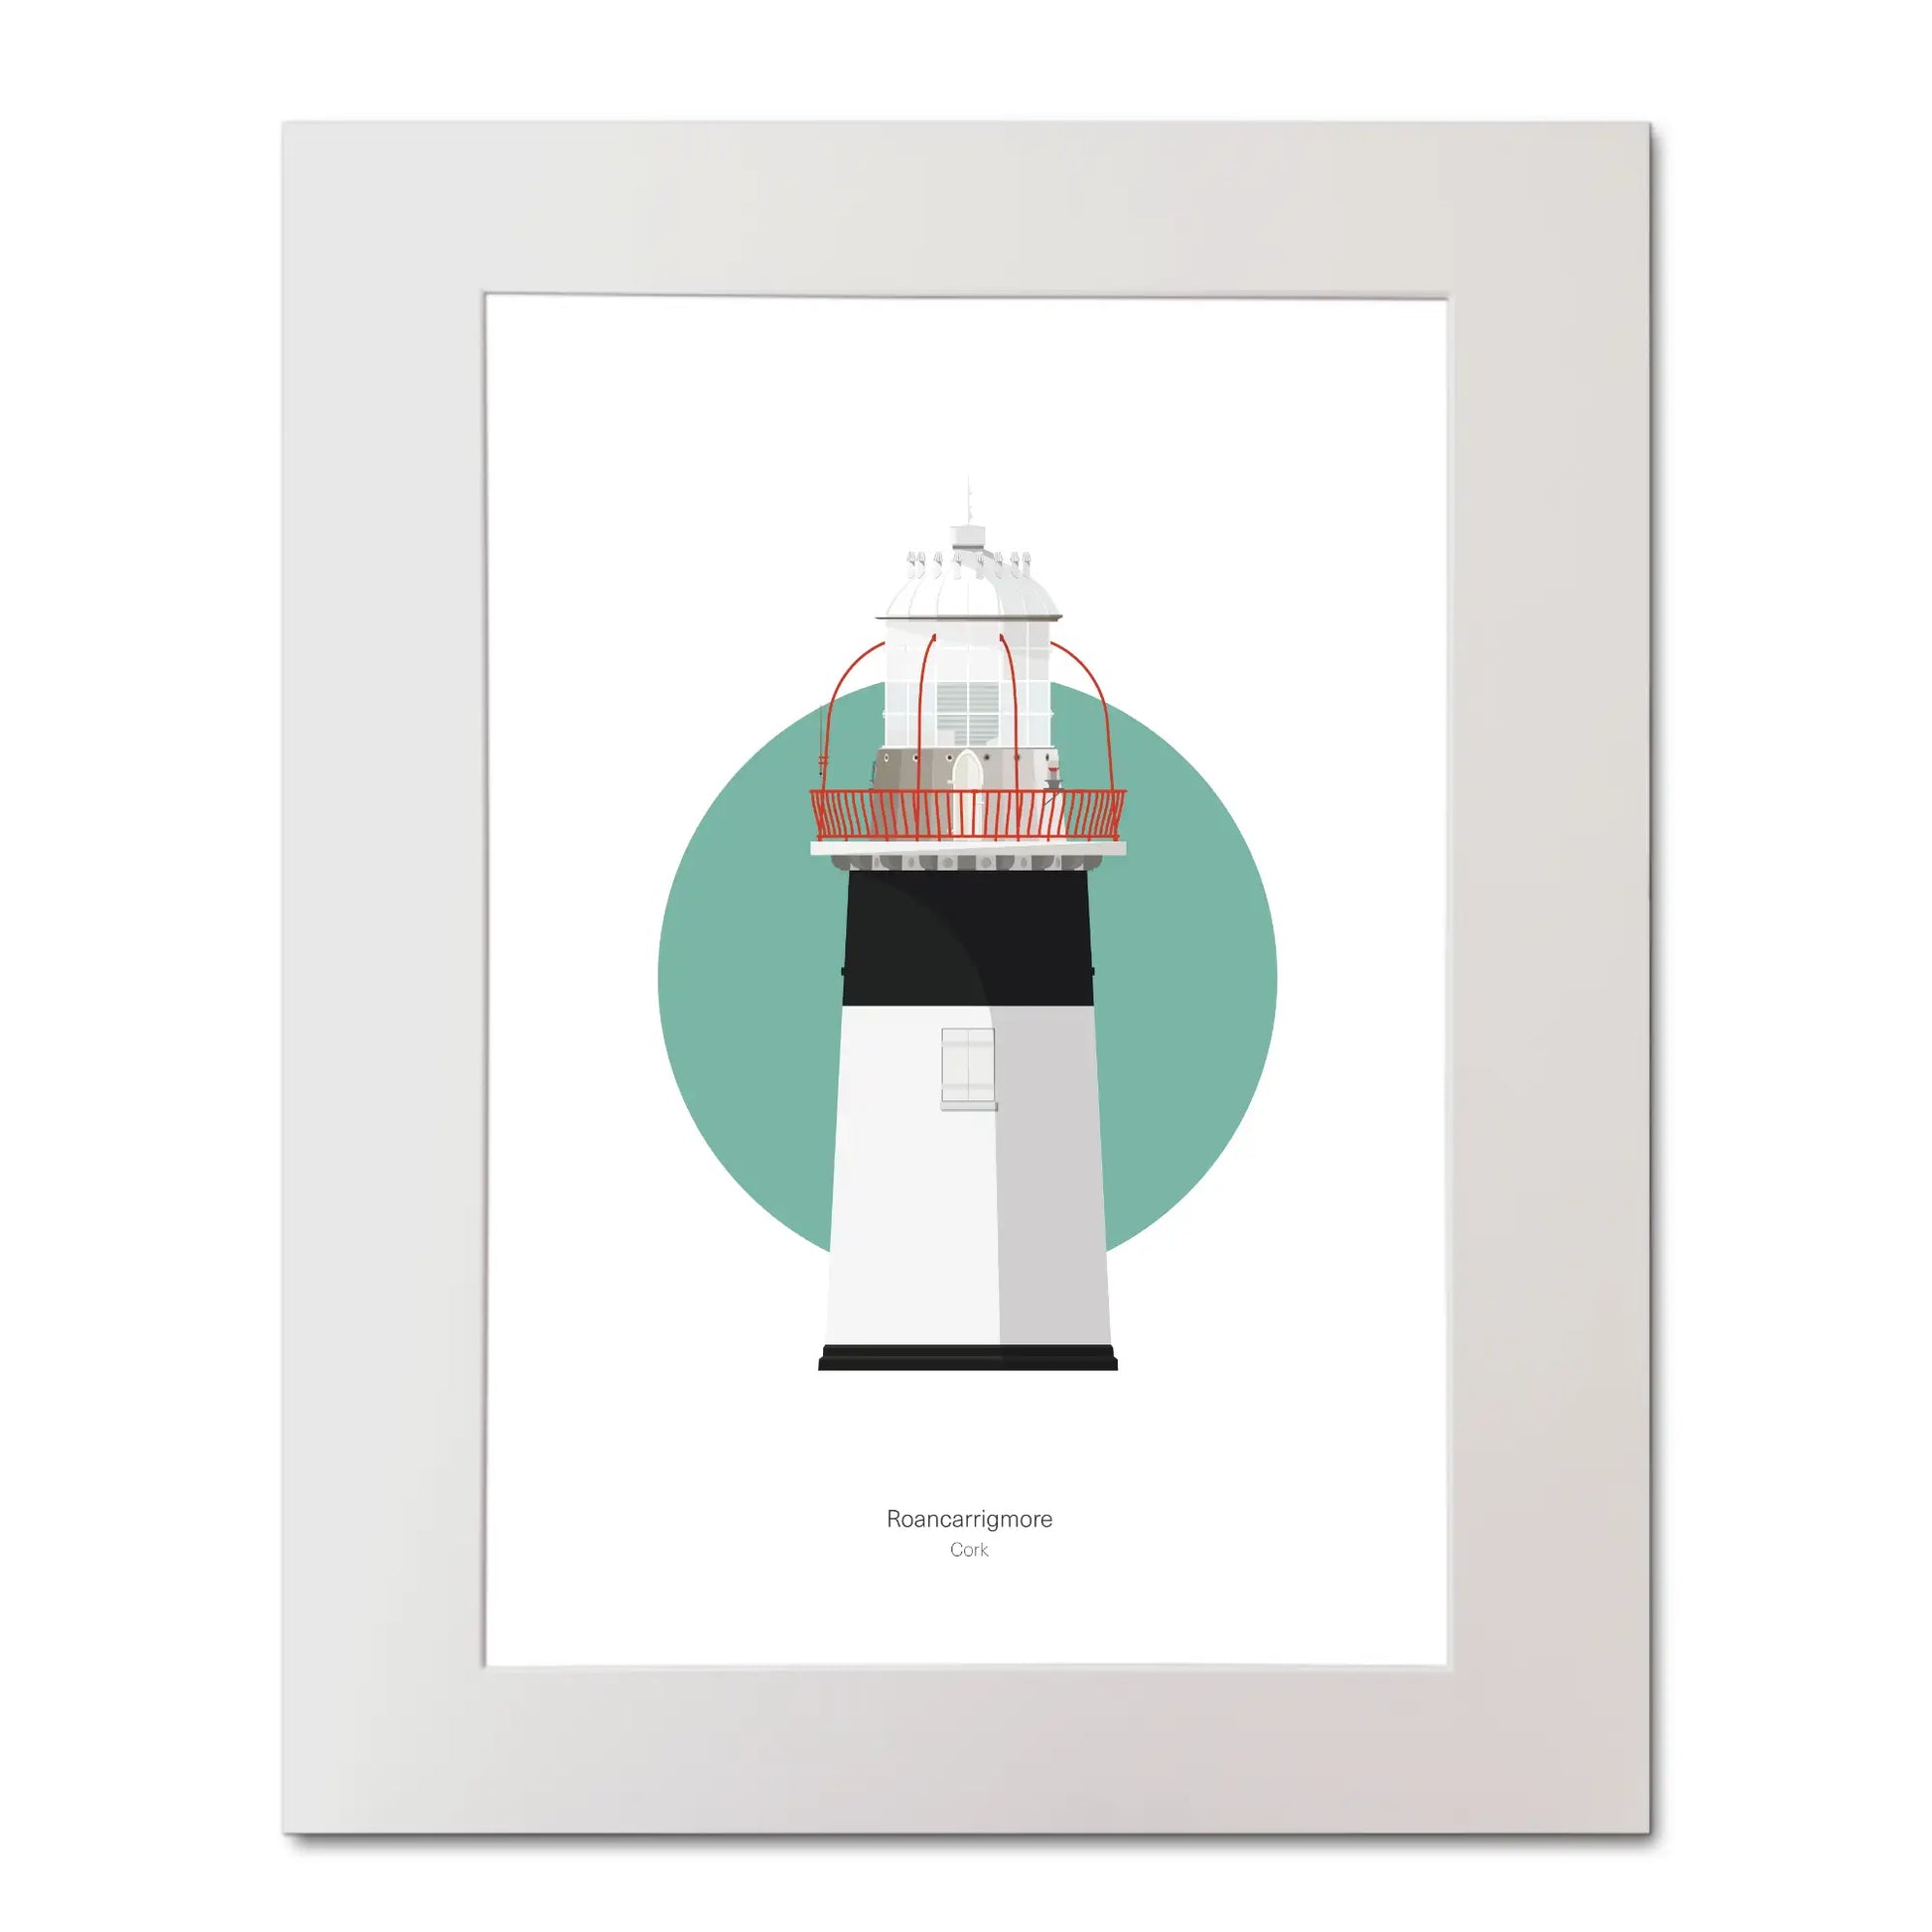 Illustration of Roancarrigmore lighthouse on a white background inside light blue square, mounted and measuring 40x50cm.